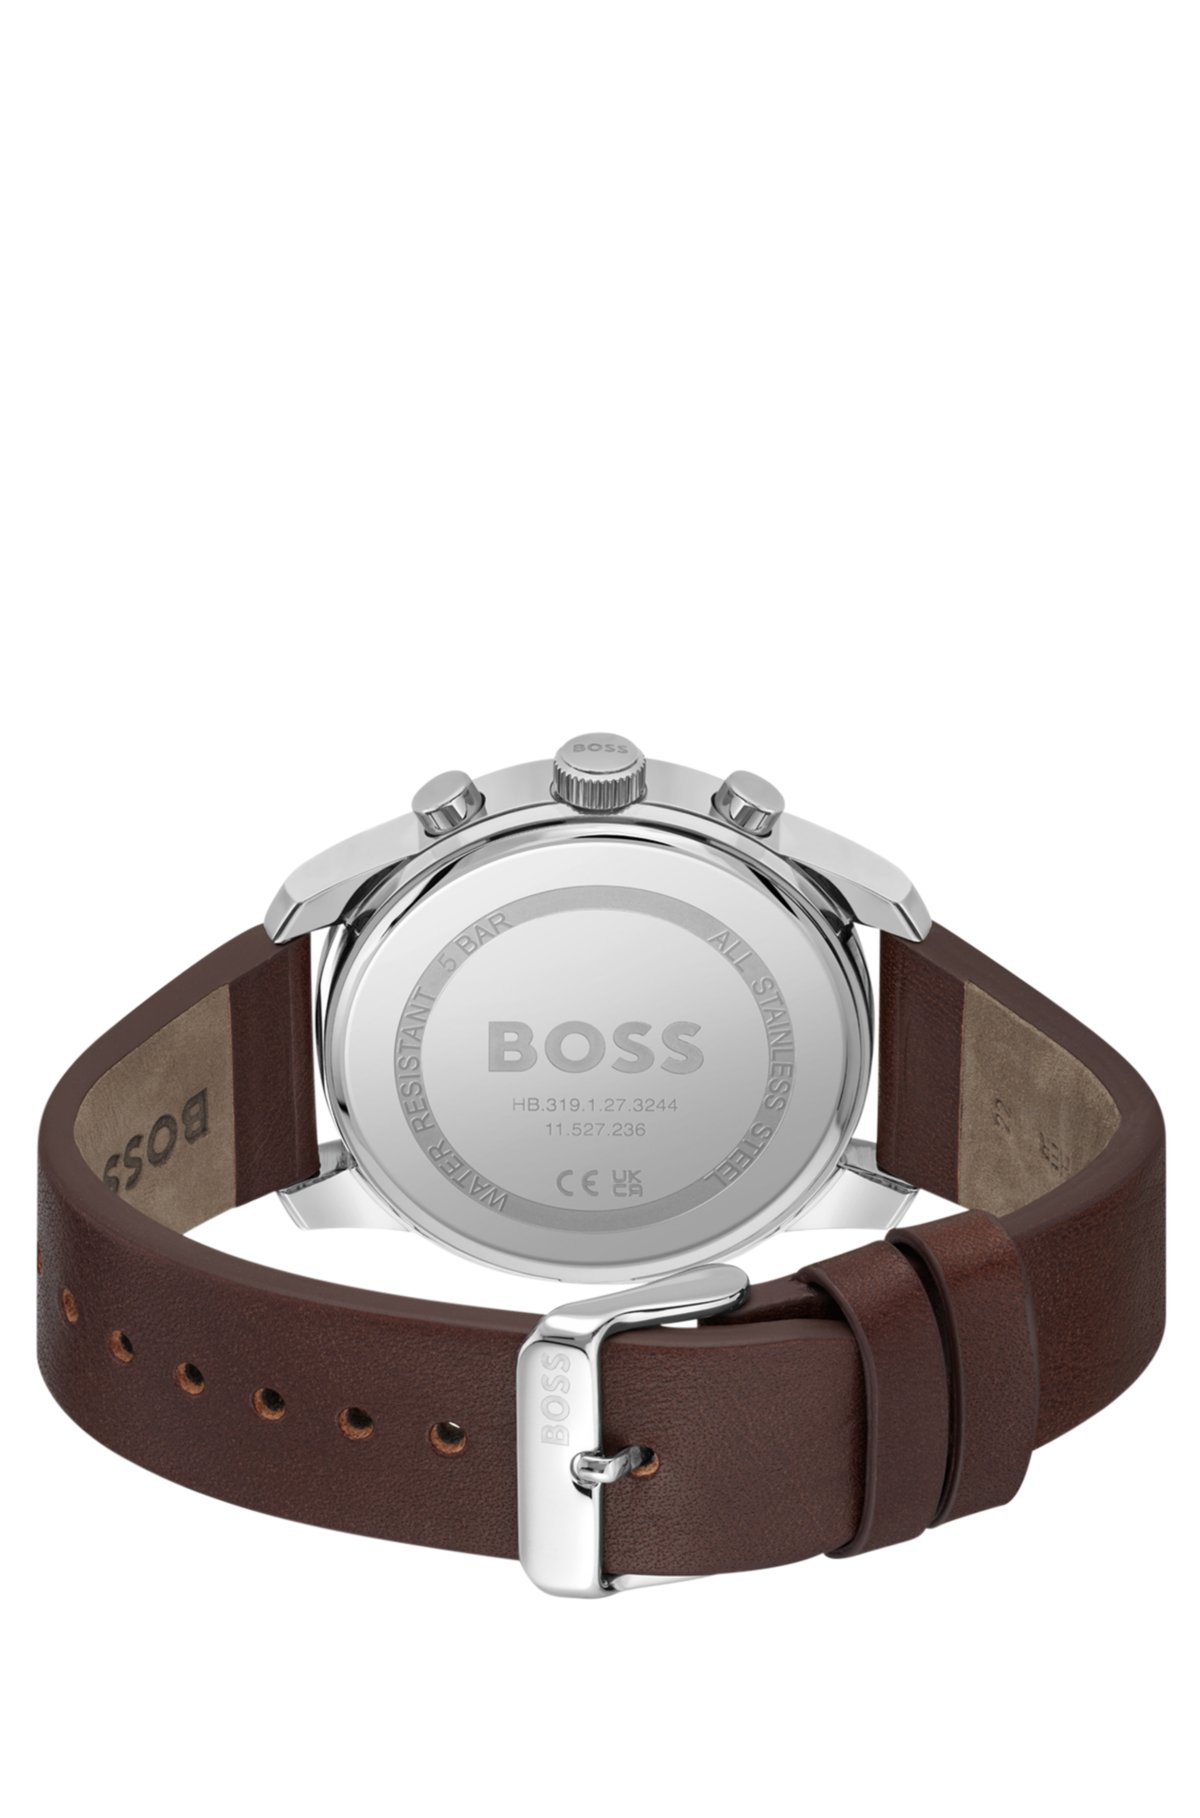 BOSS - Blue-dial chronograph with brown leather strap